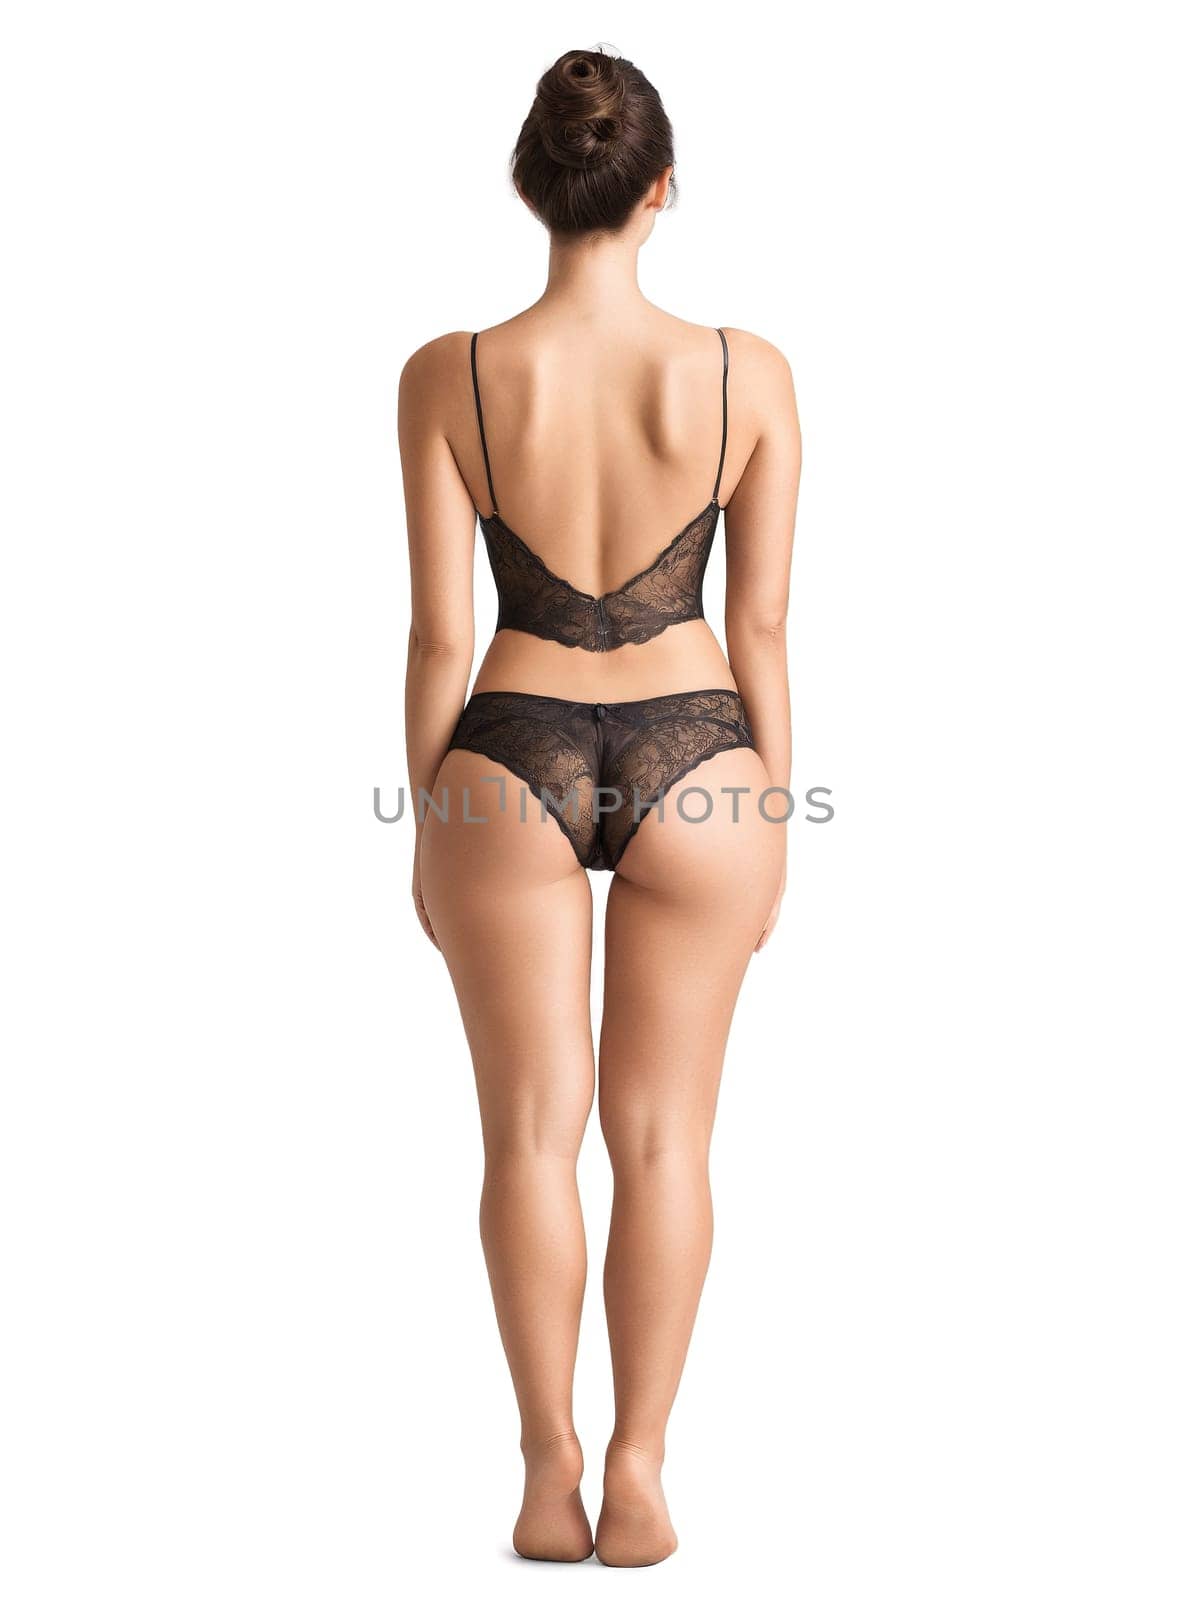 Contemporary Chic Showcase a modern twist on lingerie with a woman s back adorned.